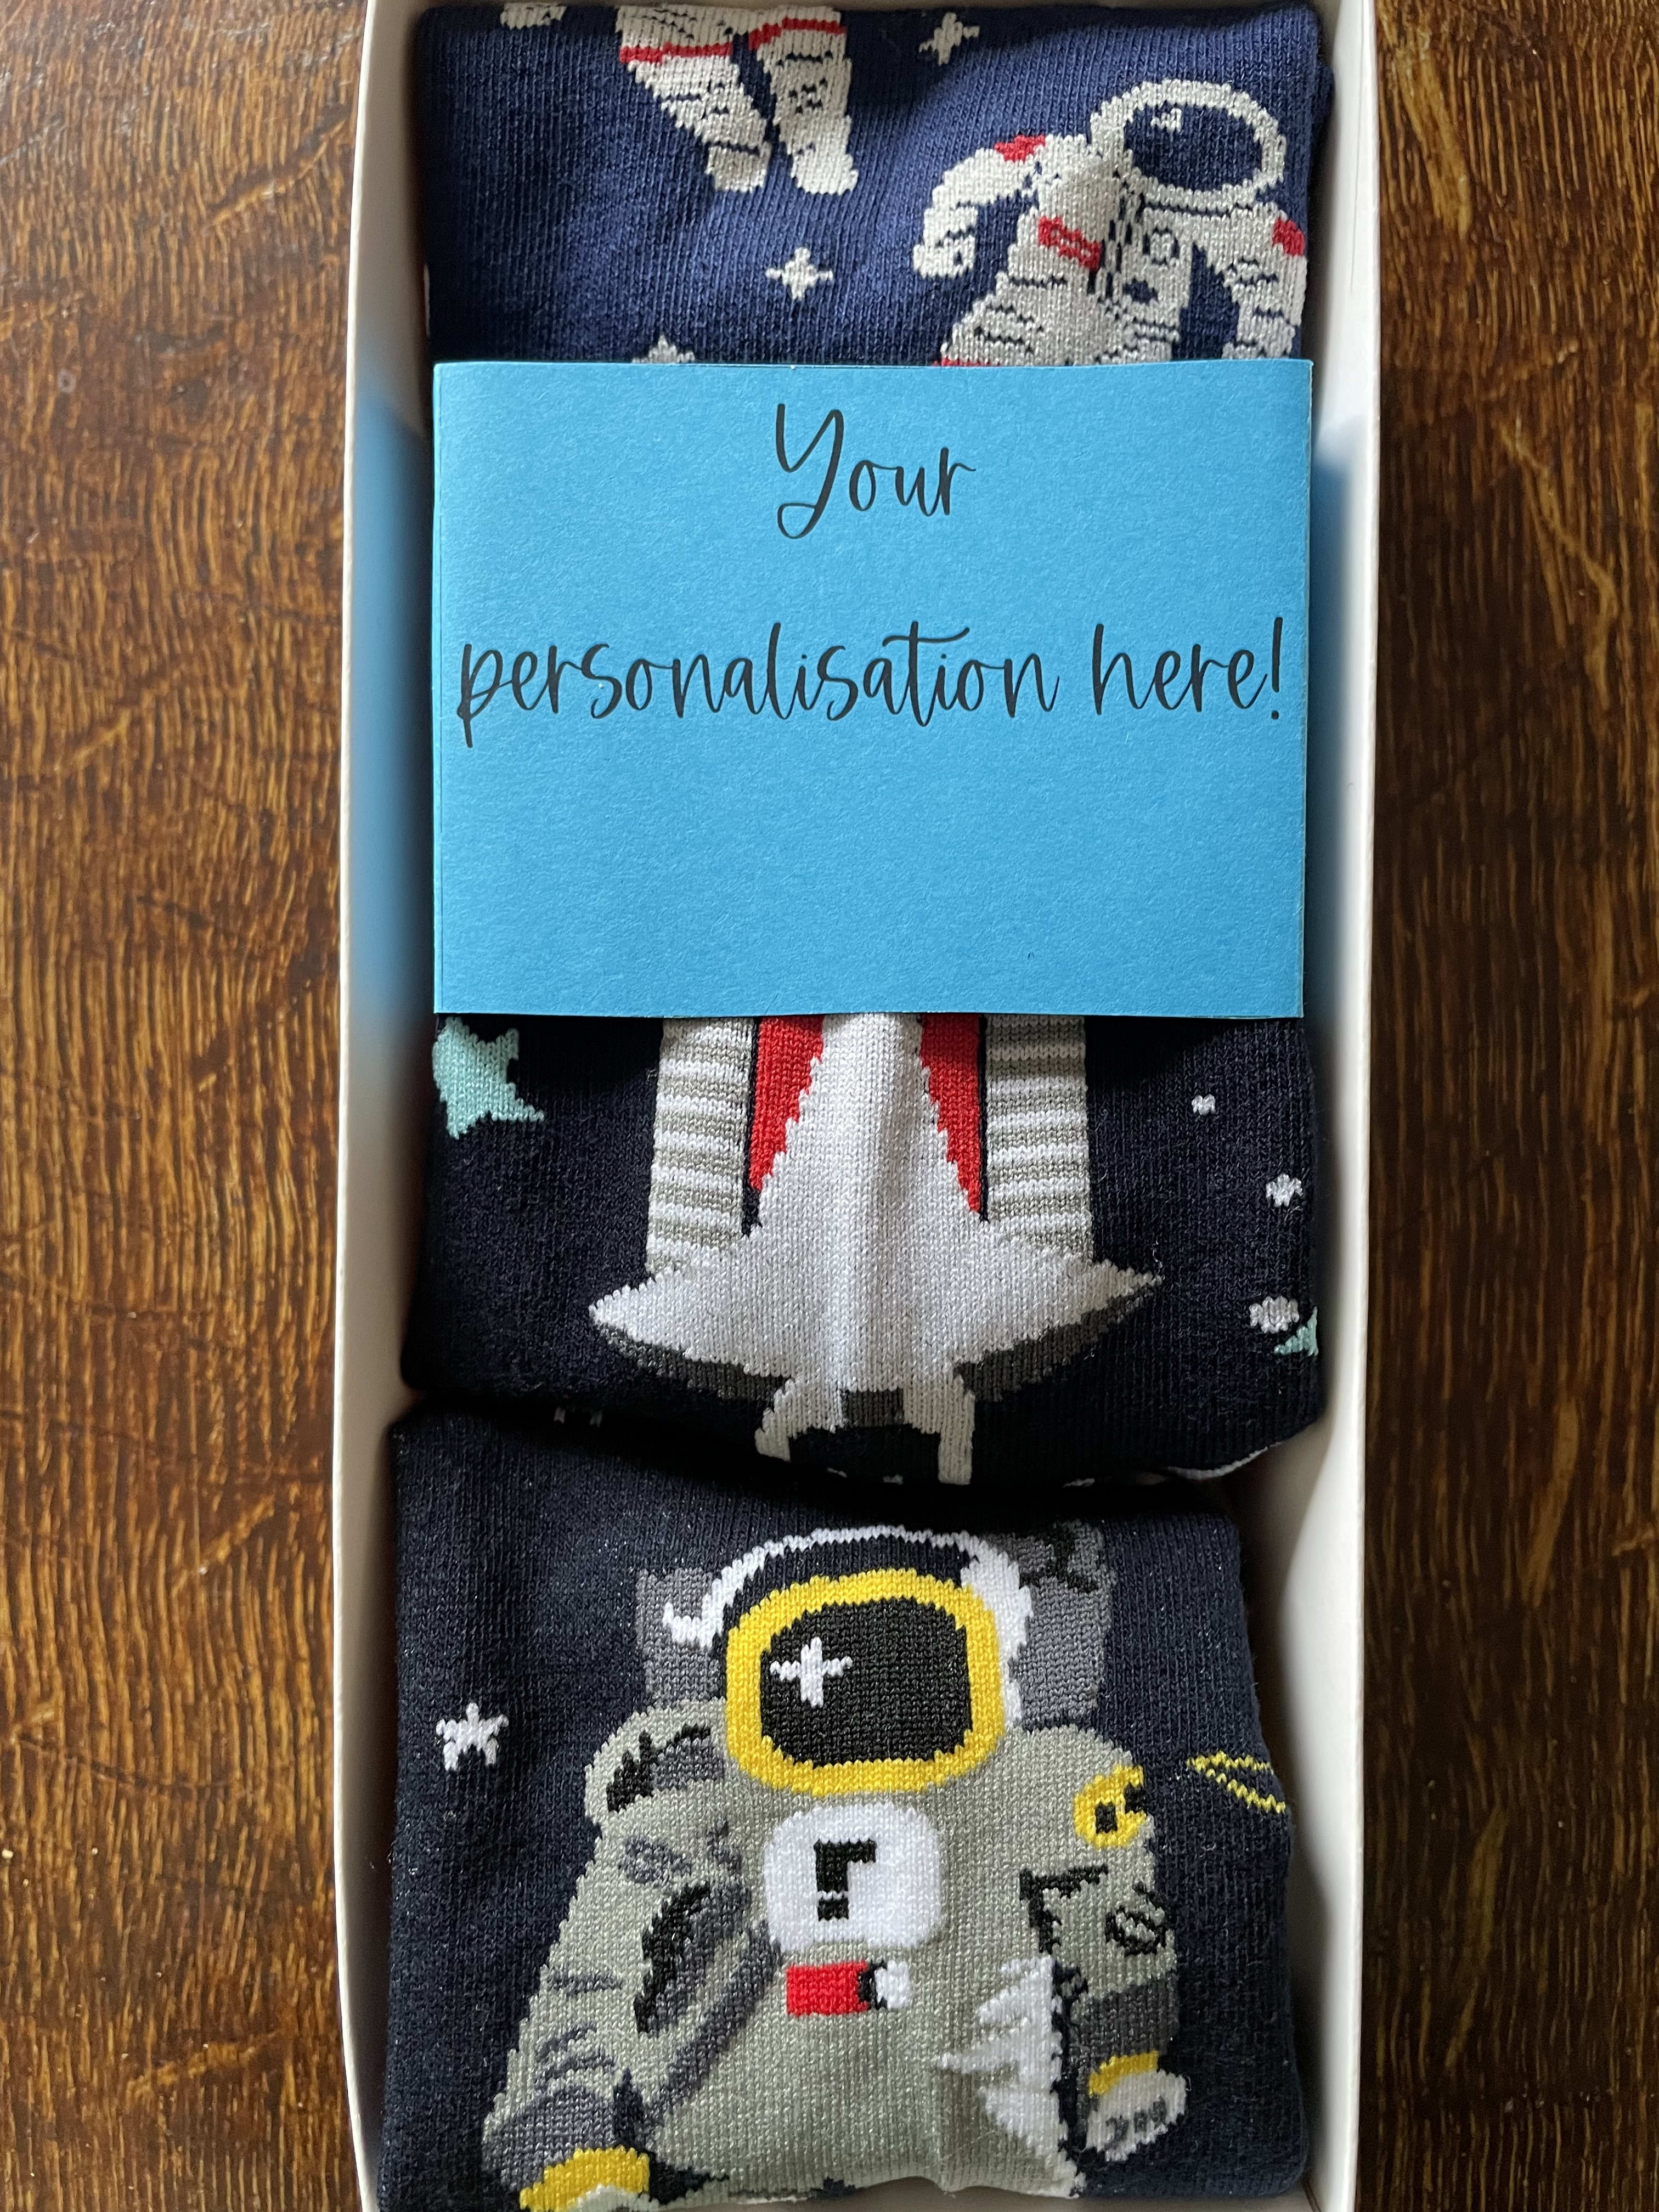 Space rocket and astronauts sock box - Trainer-style socks in gift